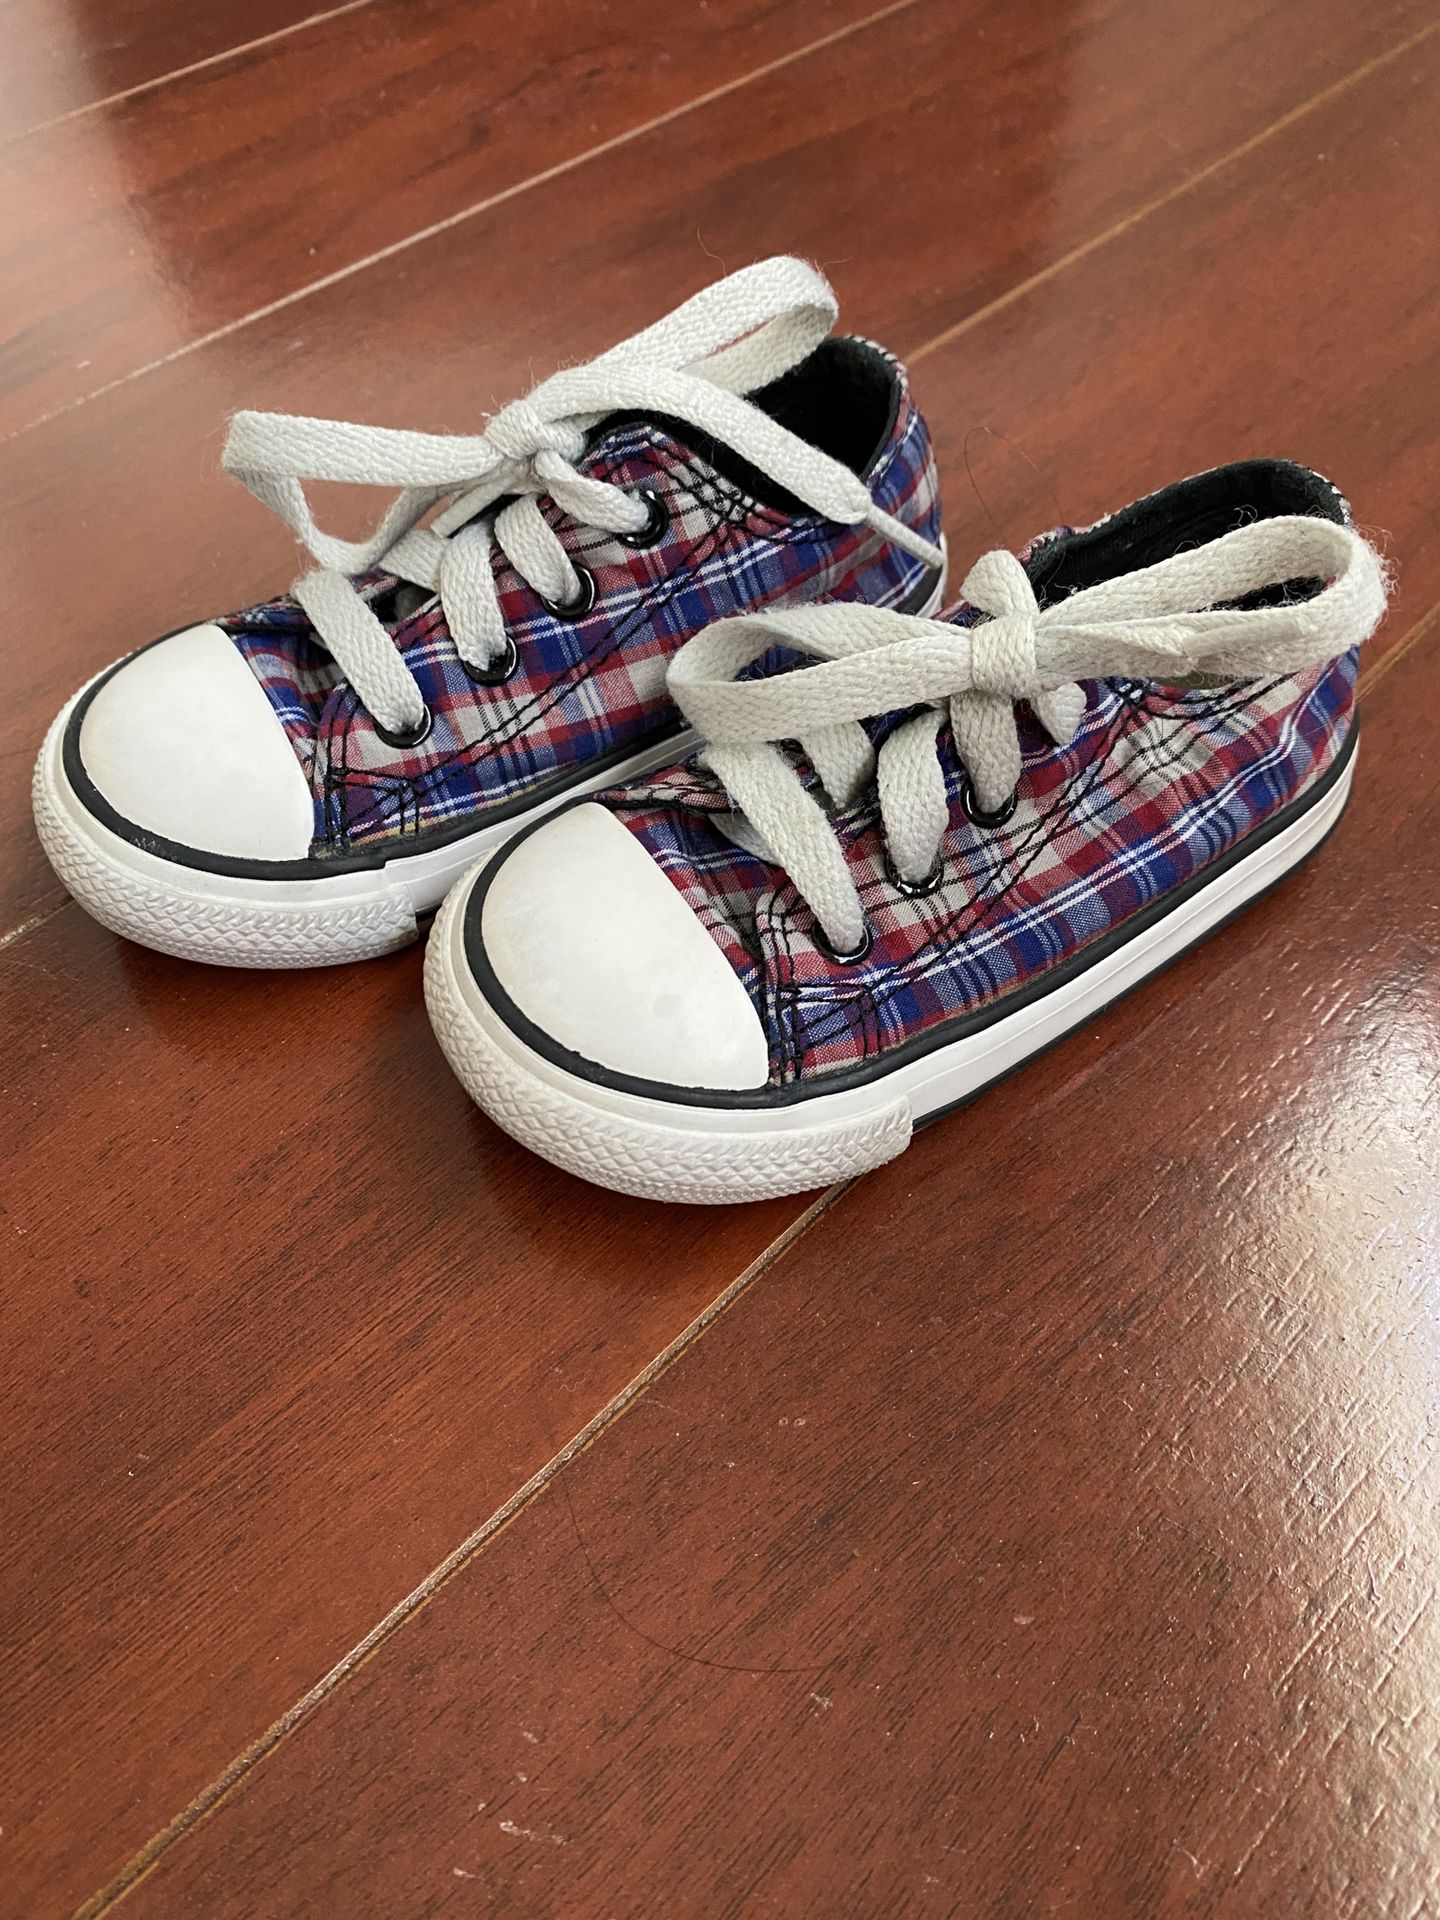 Converse All Star Toddler Size 6 